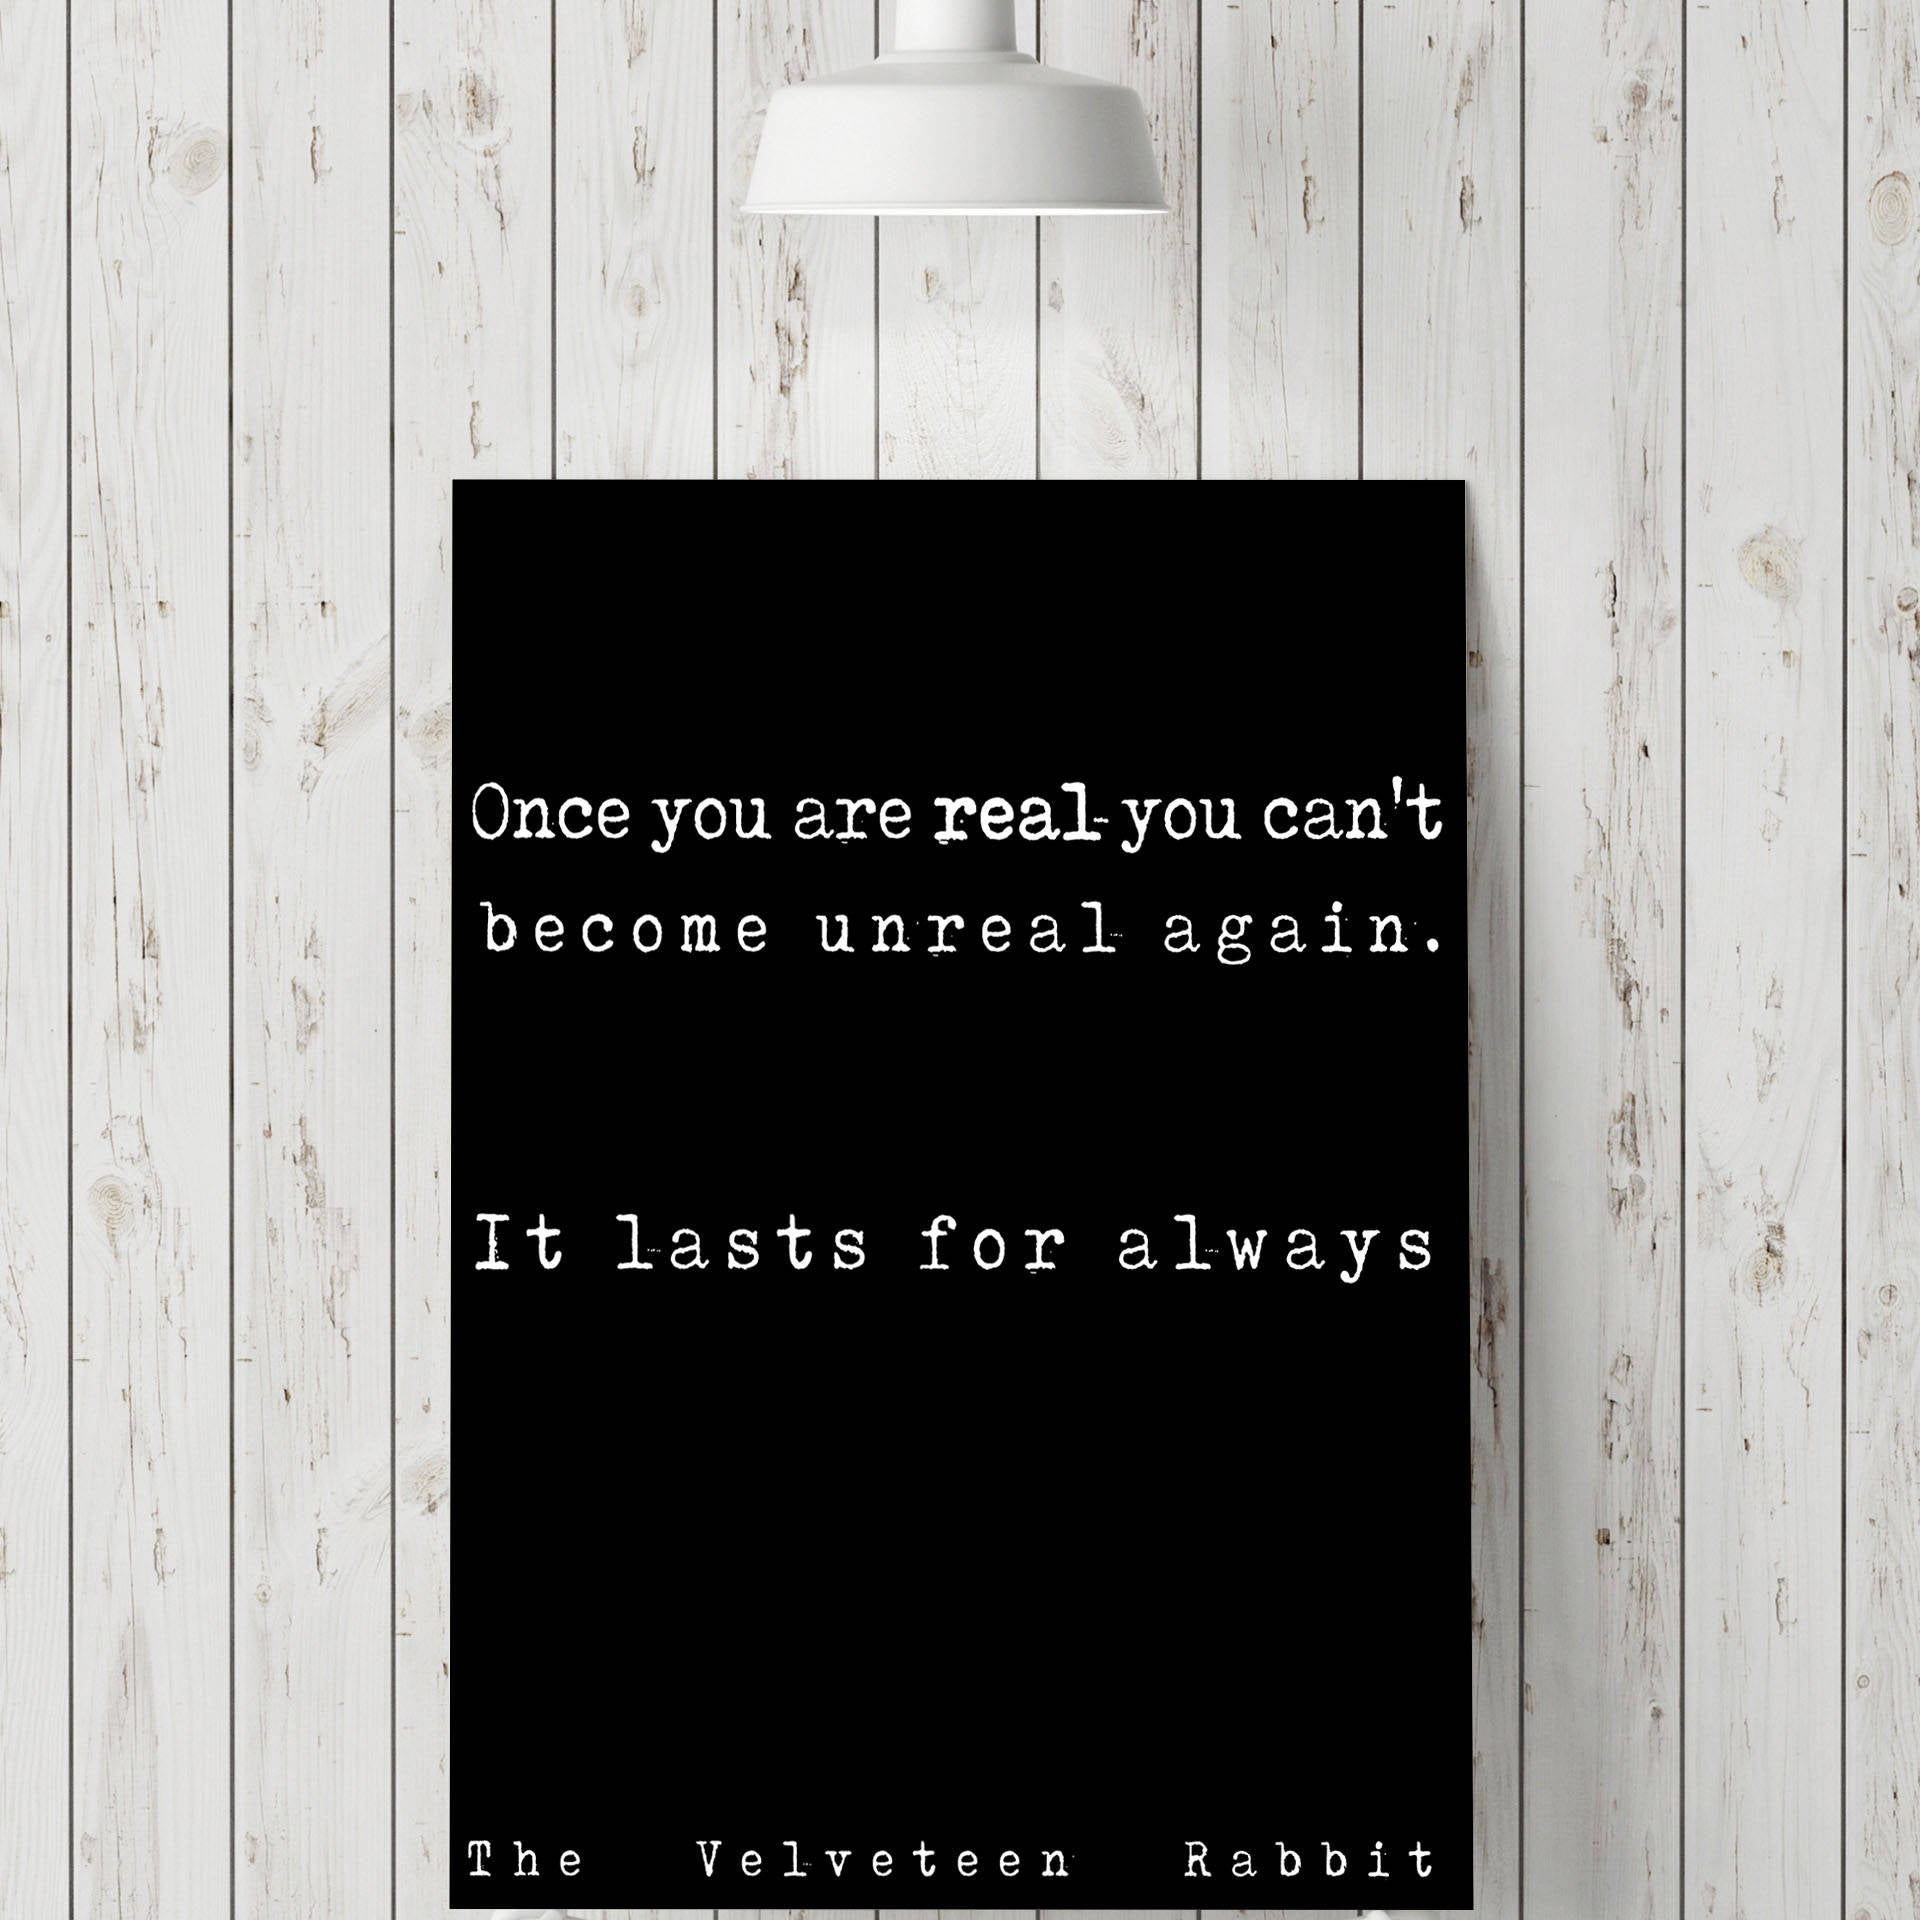 Nursery Decor Velveteen Rabbit quote, Kids Room Decor, Black & White Nursery Prints, Book Quote Print Once you are real, Margery Williams - BookQuoteDecor